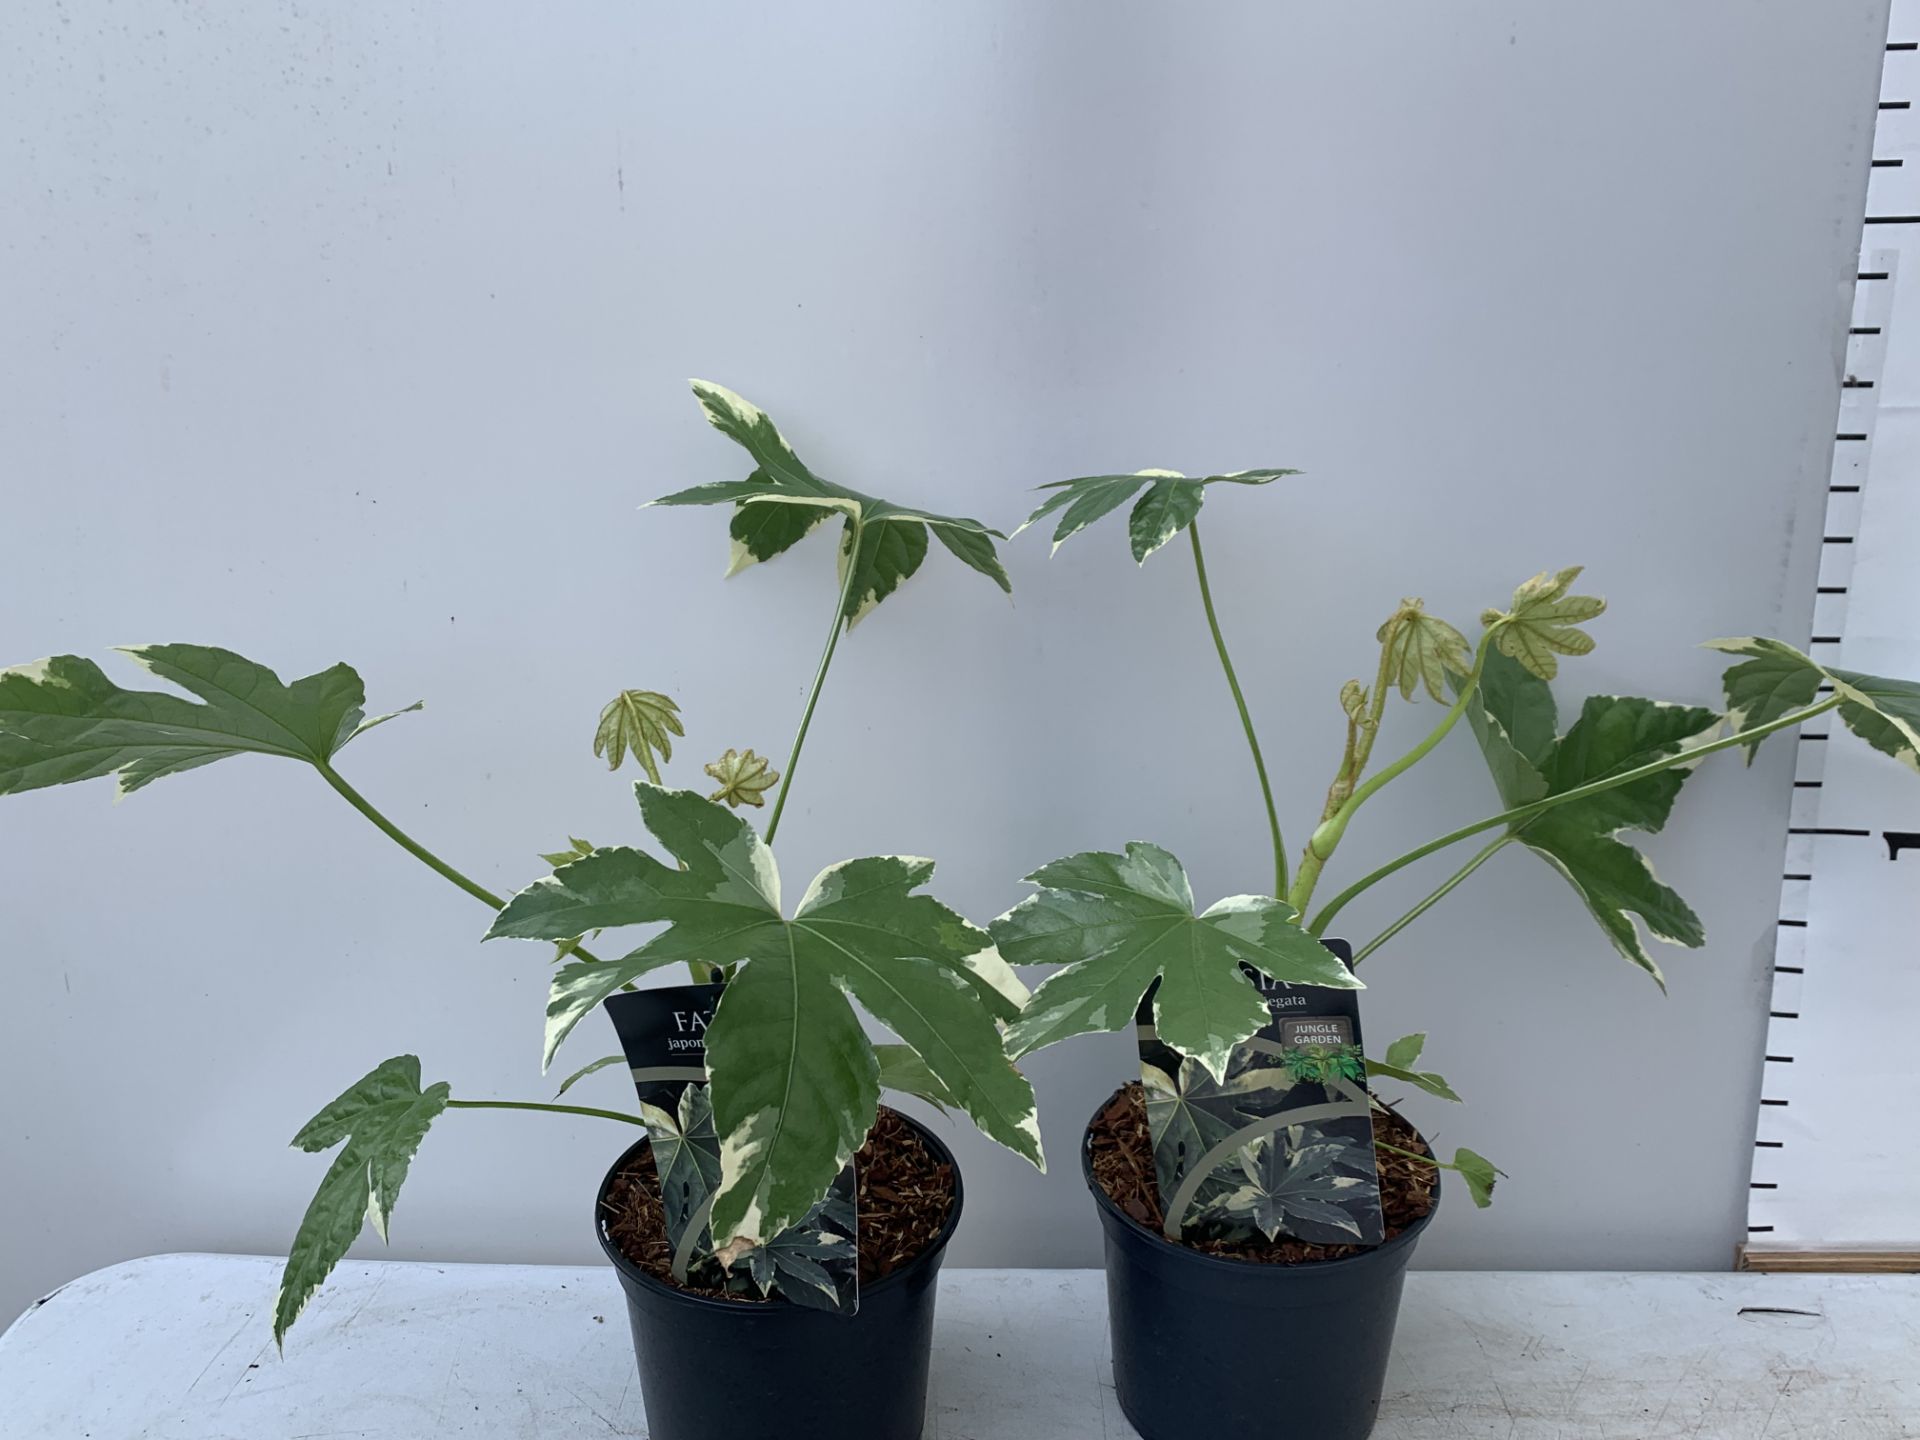 TWO FATSIA JUNGLE GARDEN JAPONICA VARIEGATA IN 2 LTR POTS 50CM TALL PLUS VAT TO BE SOLD FOR THE TWO - Image 5 of 10